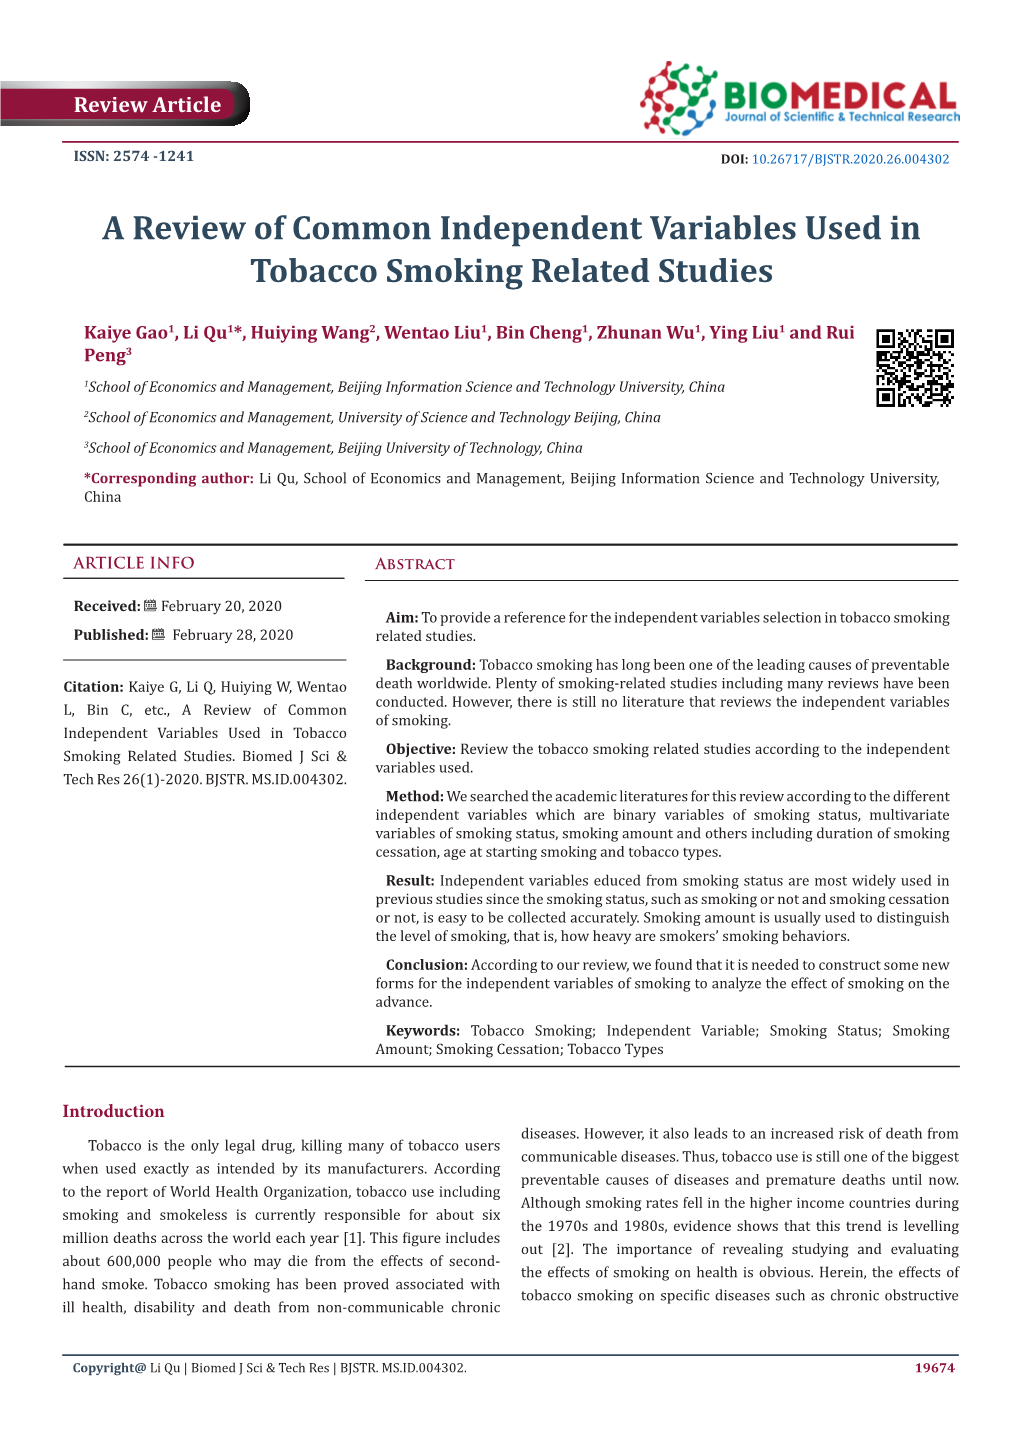 A Review of Common Independent Variables Used in Tobacco Smoking Related Studies